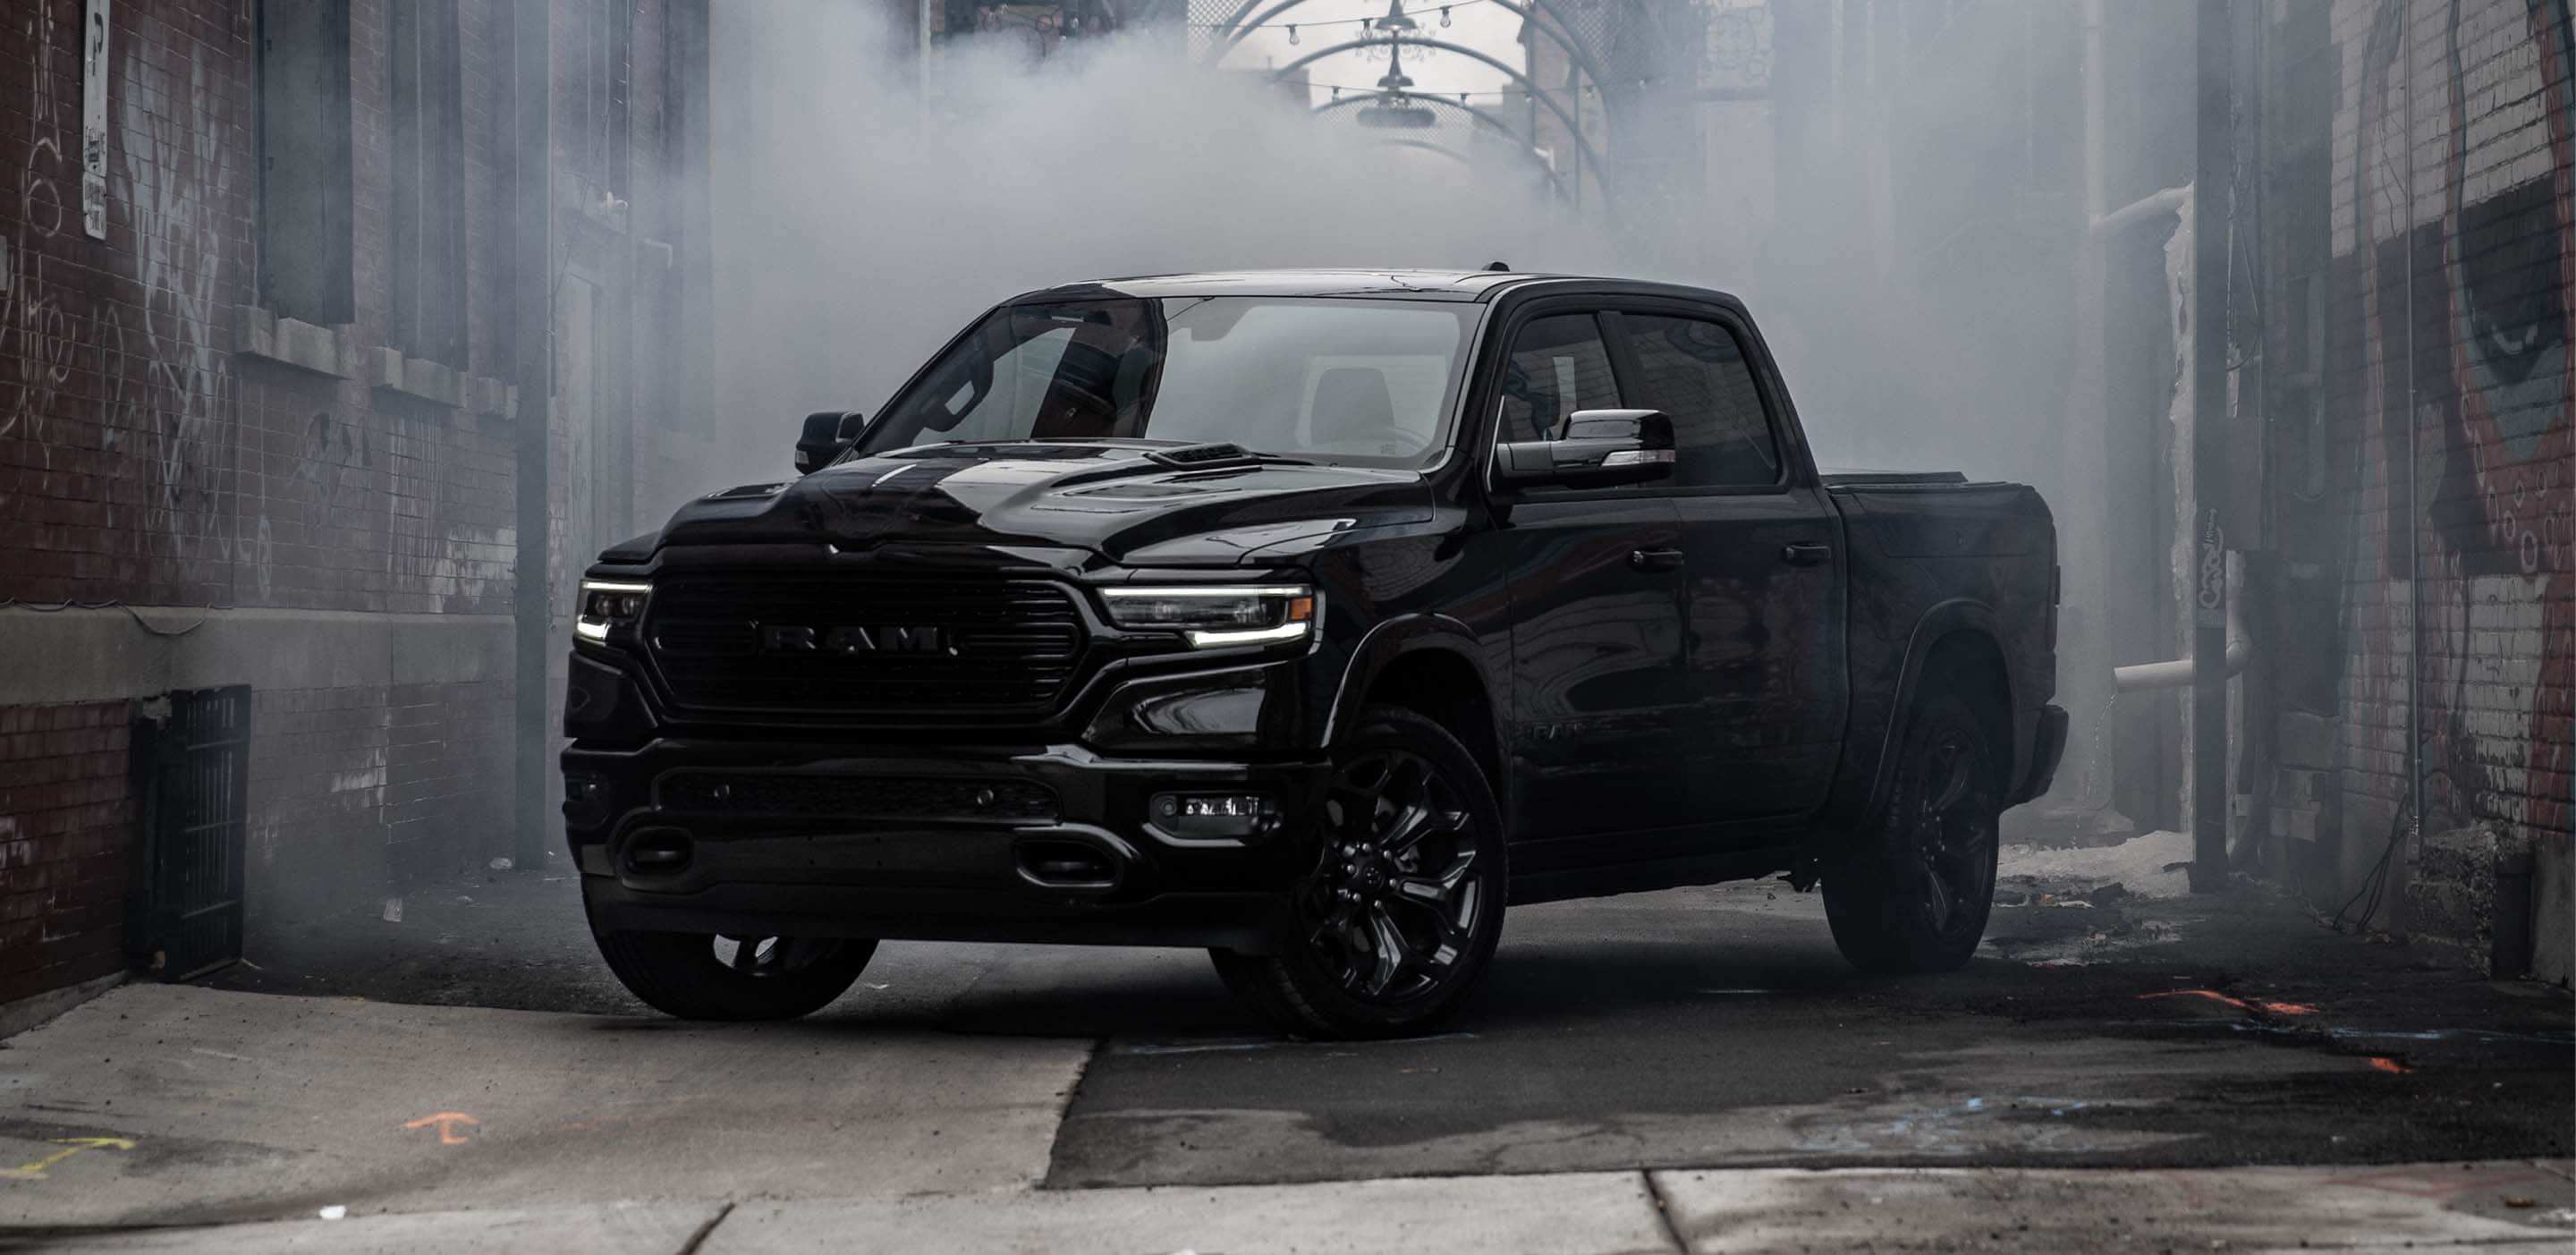 The 2023 Ram 1500 parked in a graffitied alleyway, surrounded by fog.